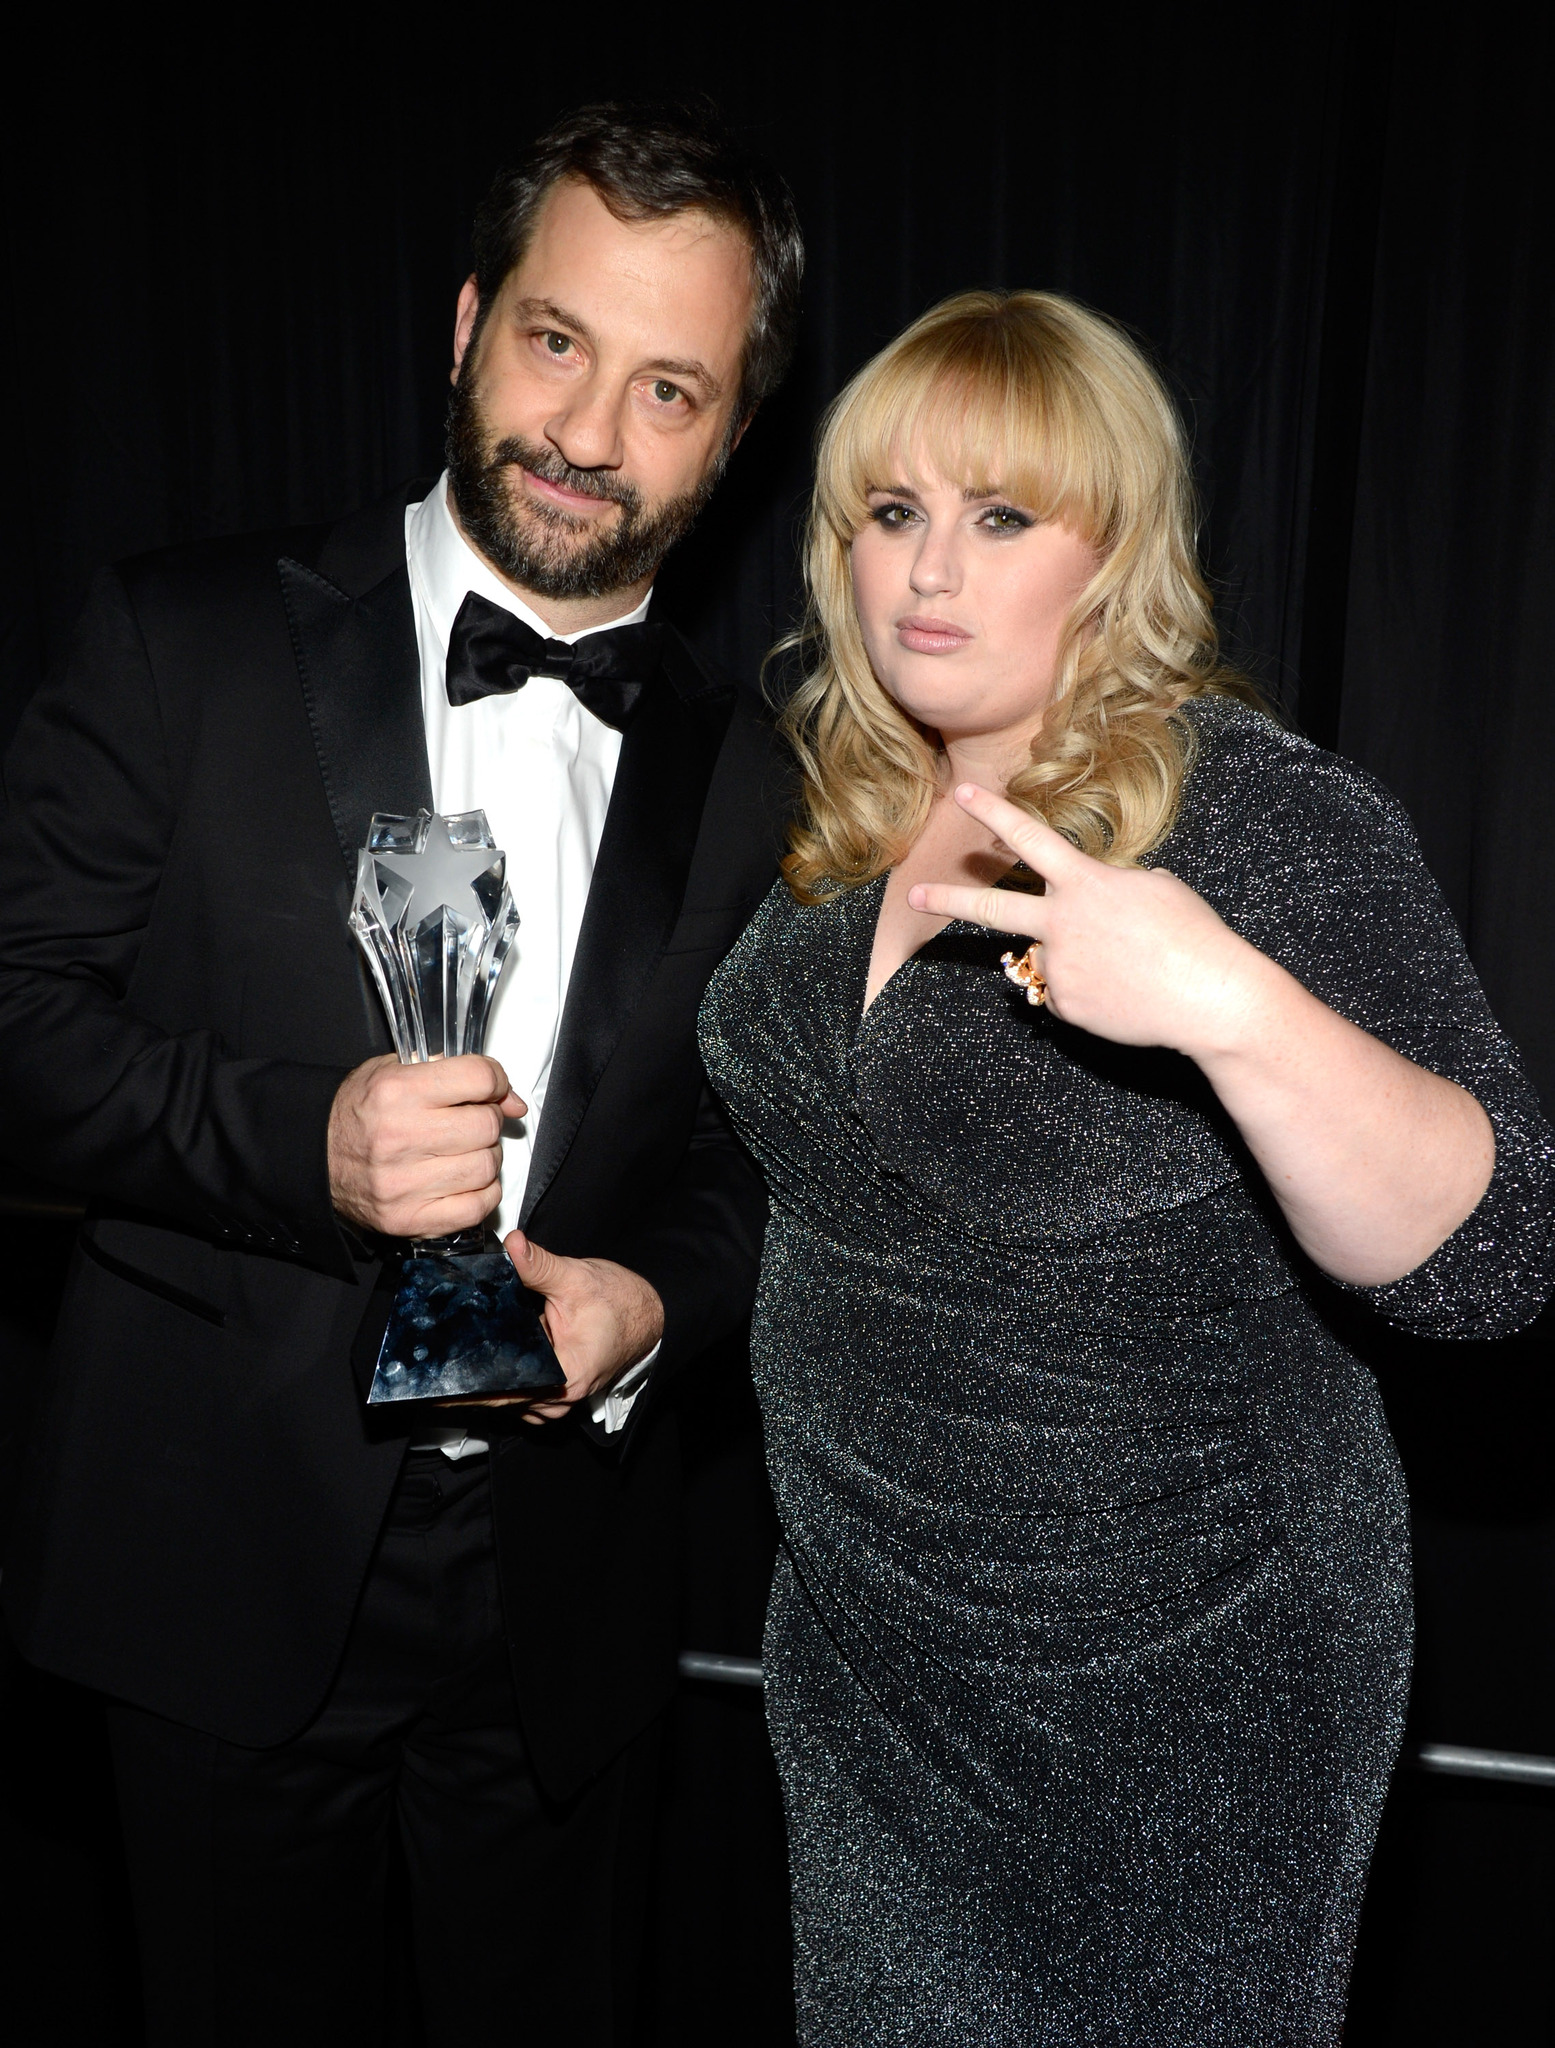 Judd Apatow and Rebel Wilson